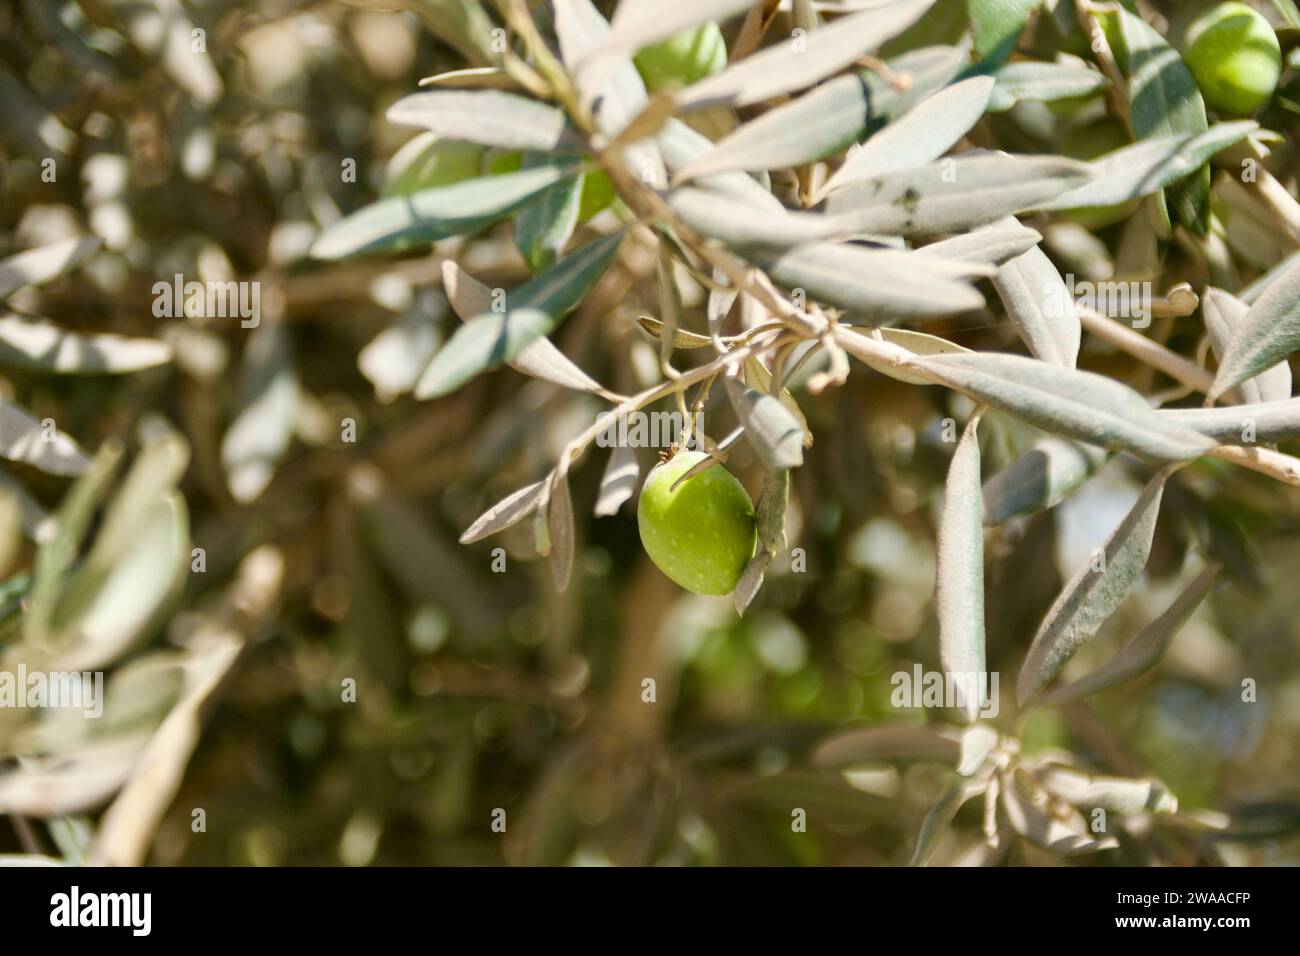 Close-up of olive branches bearing young fruit, showcasing Israel's natural agricultural beauty. Stock Photo